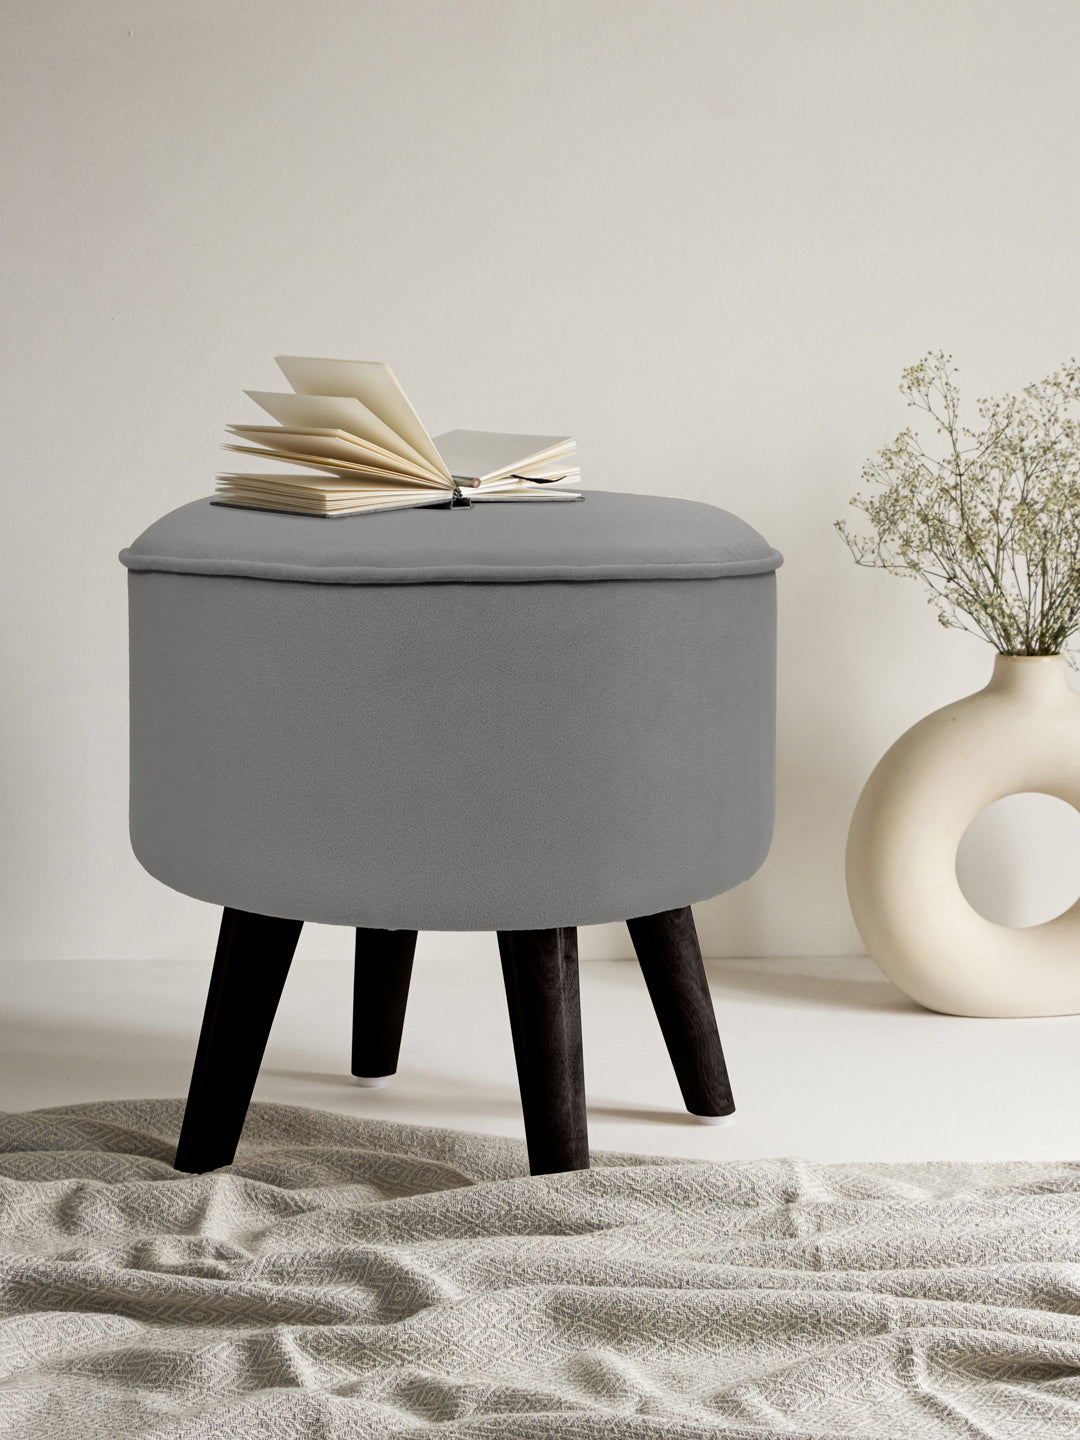 Aesthetic Grey Ottoman With Wooden Legs